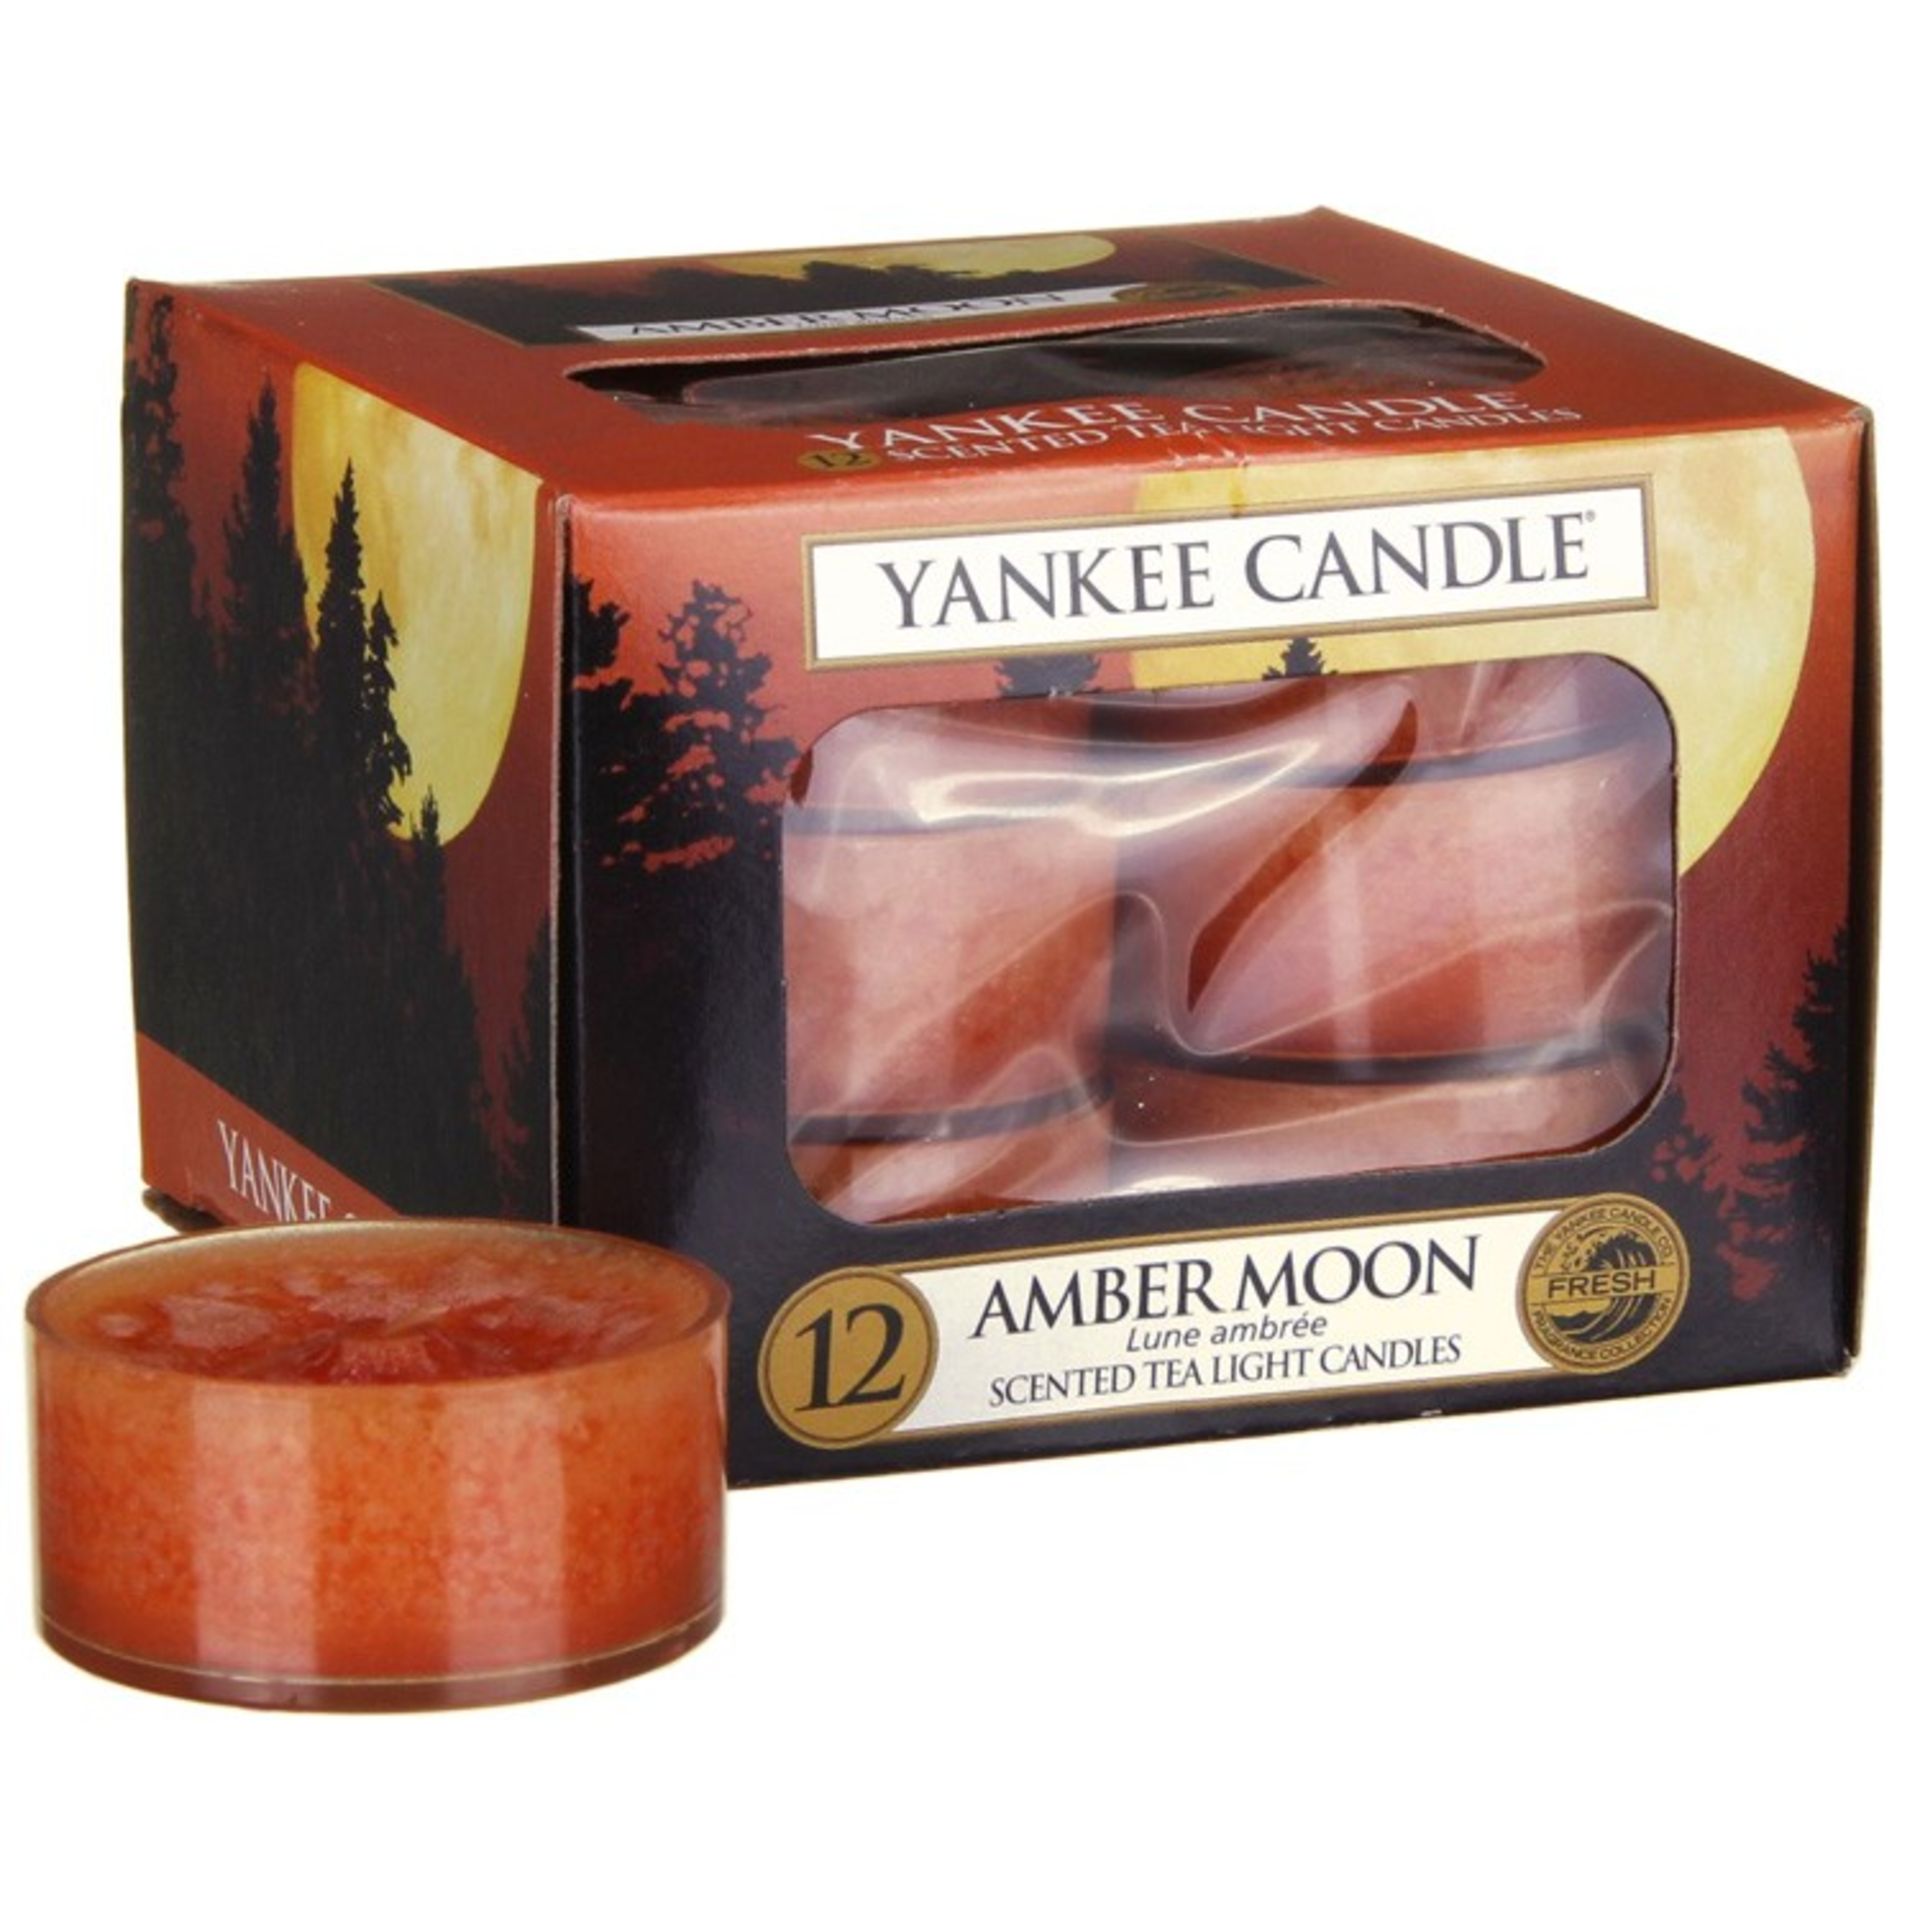 V Brand New 12 Yankee Candle Scented Tea Light Candles Amber Moon eBay Price £7.99